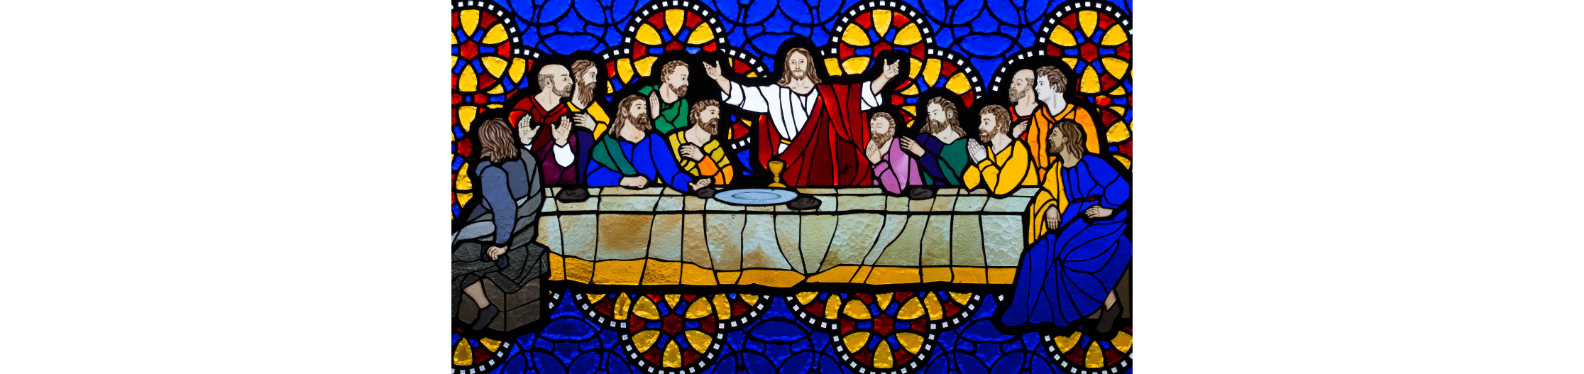 Stained glass of the Last Supper